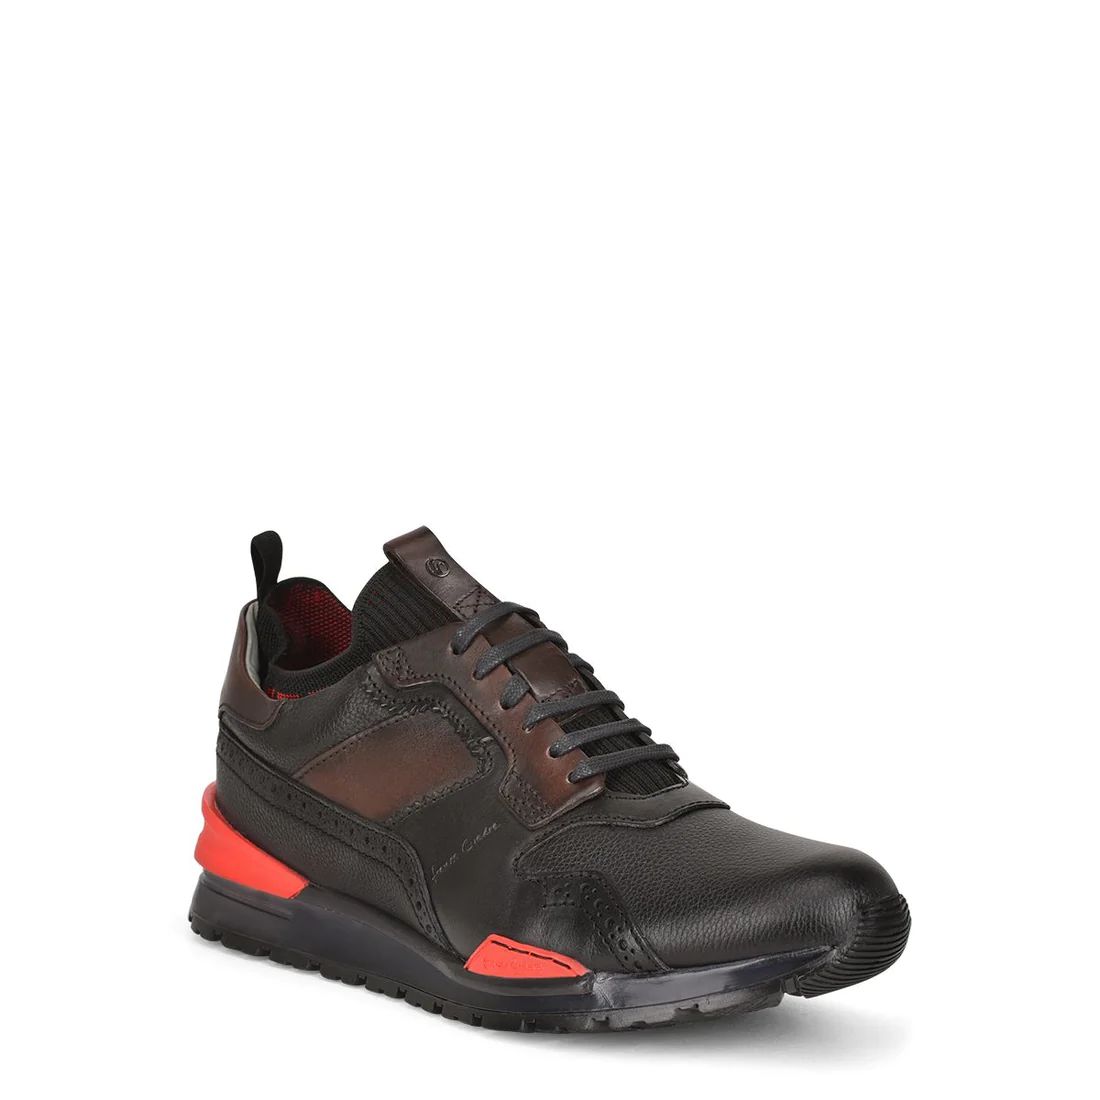 Cuadra | Hand-Painted Black Leather Sneakers